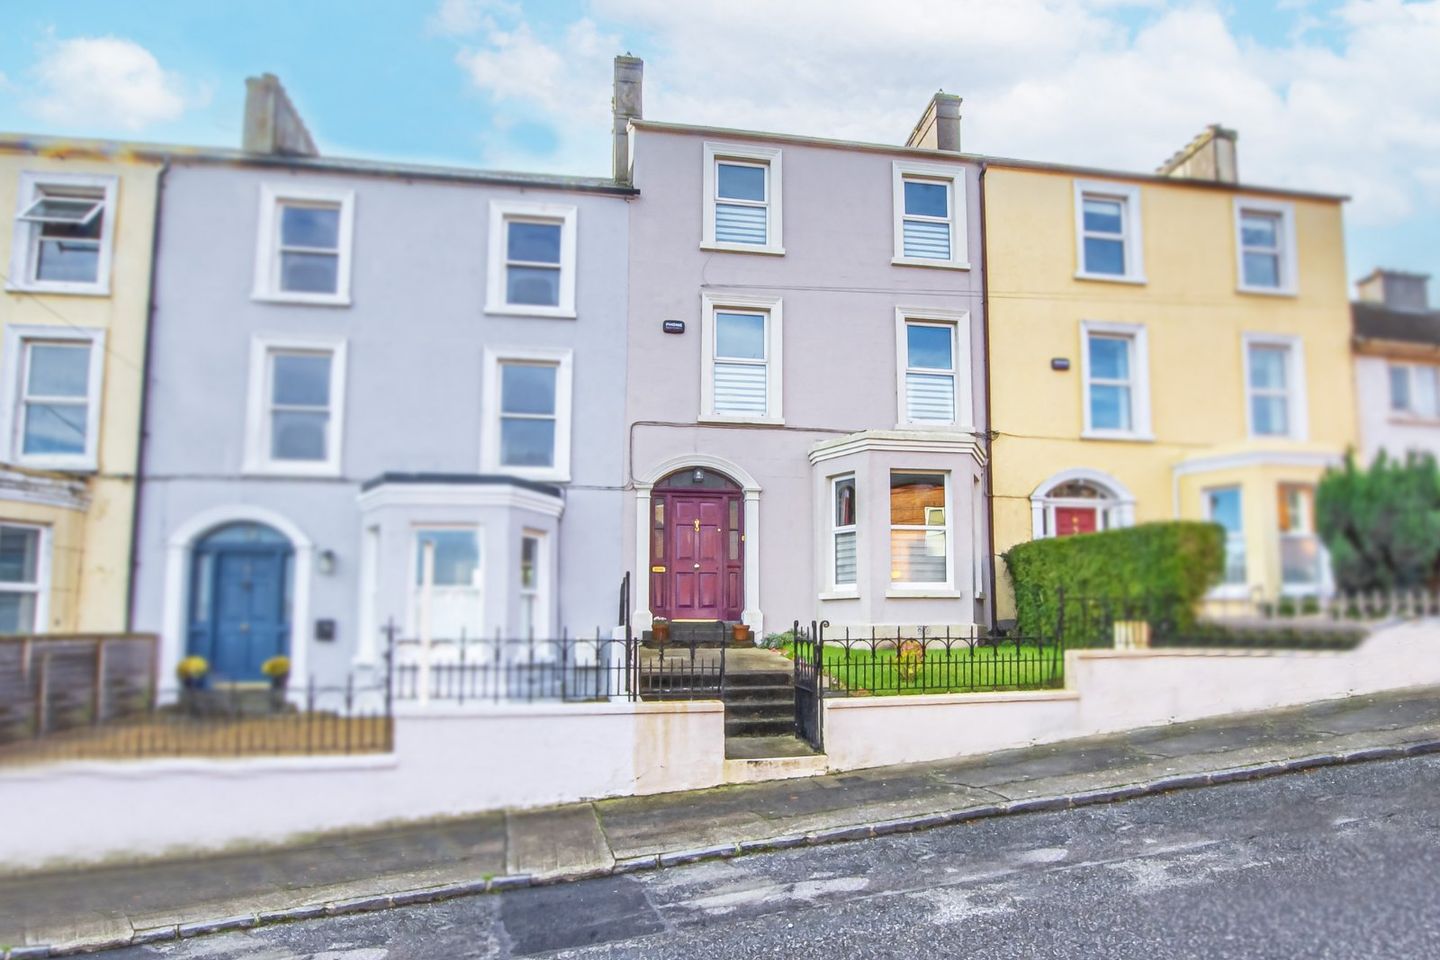 57 Saint Declan's Place, Lower Newtown, Waterford City, Co. Waterford, X91HW0H